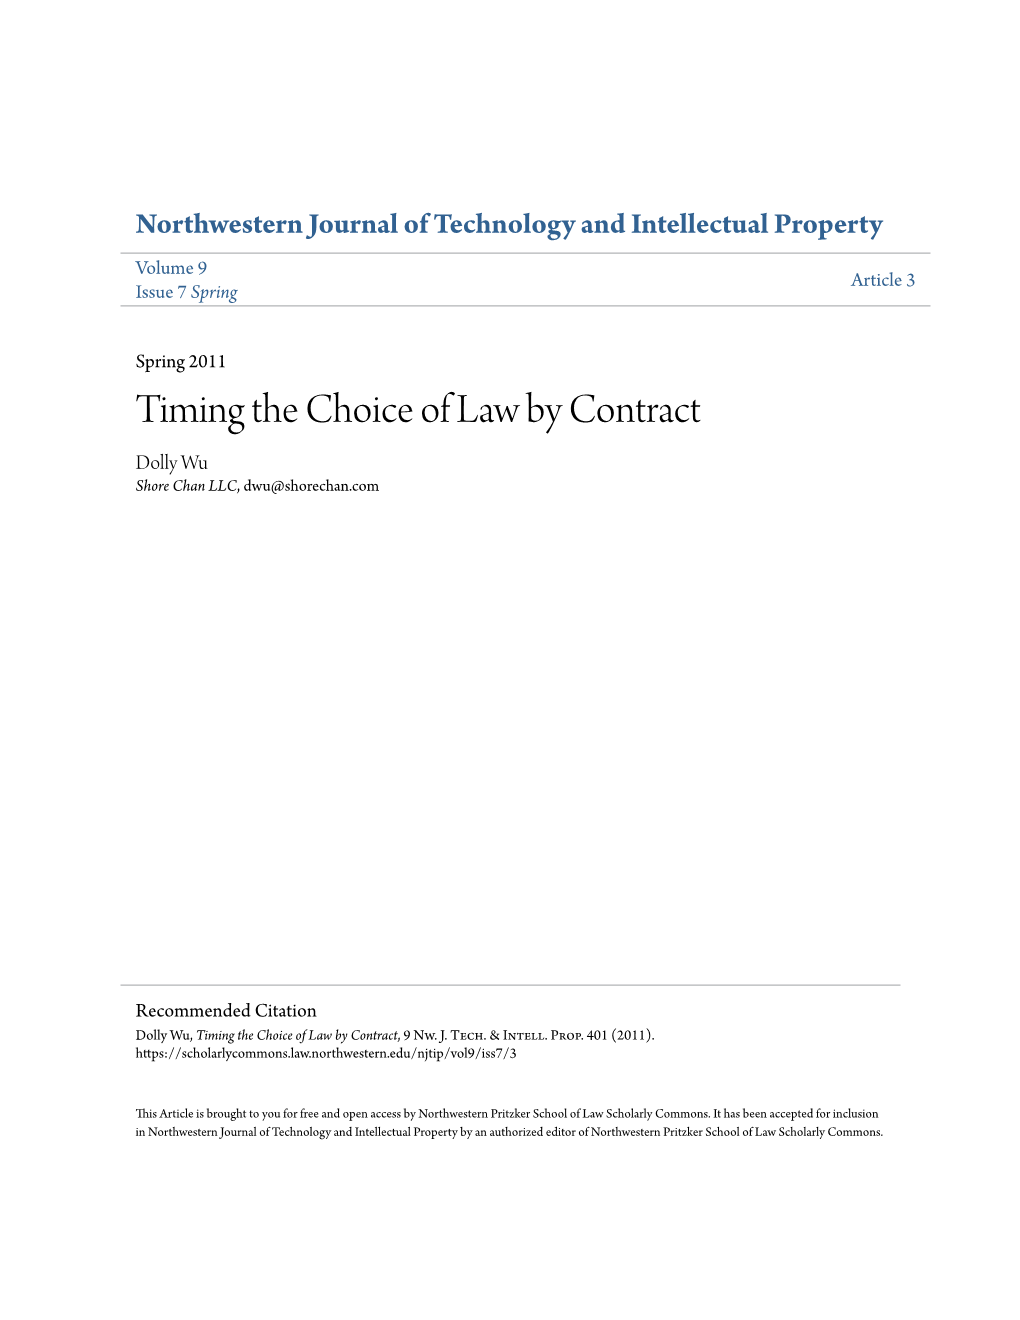 Timing the Choice of Law by Contract Dolly Wu Shore Chan LLC, Dwu@Shorechan.Com